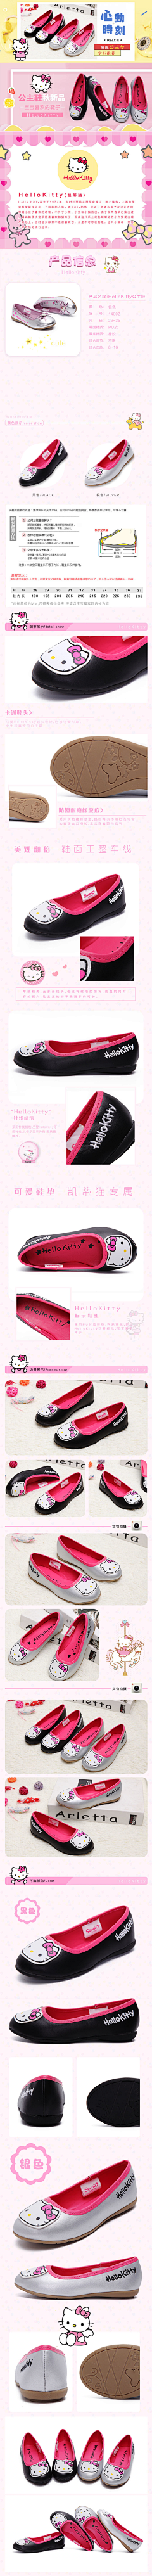 micasion采集到hello kity